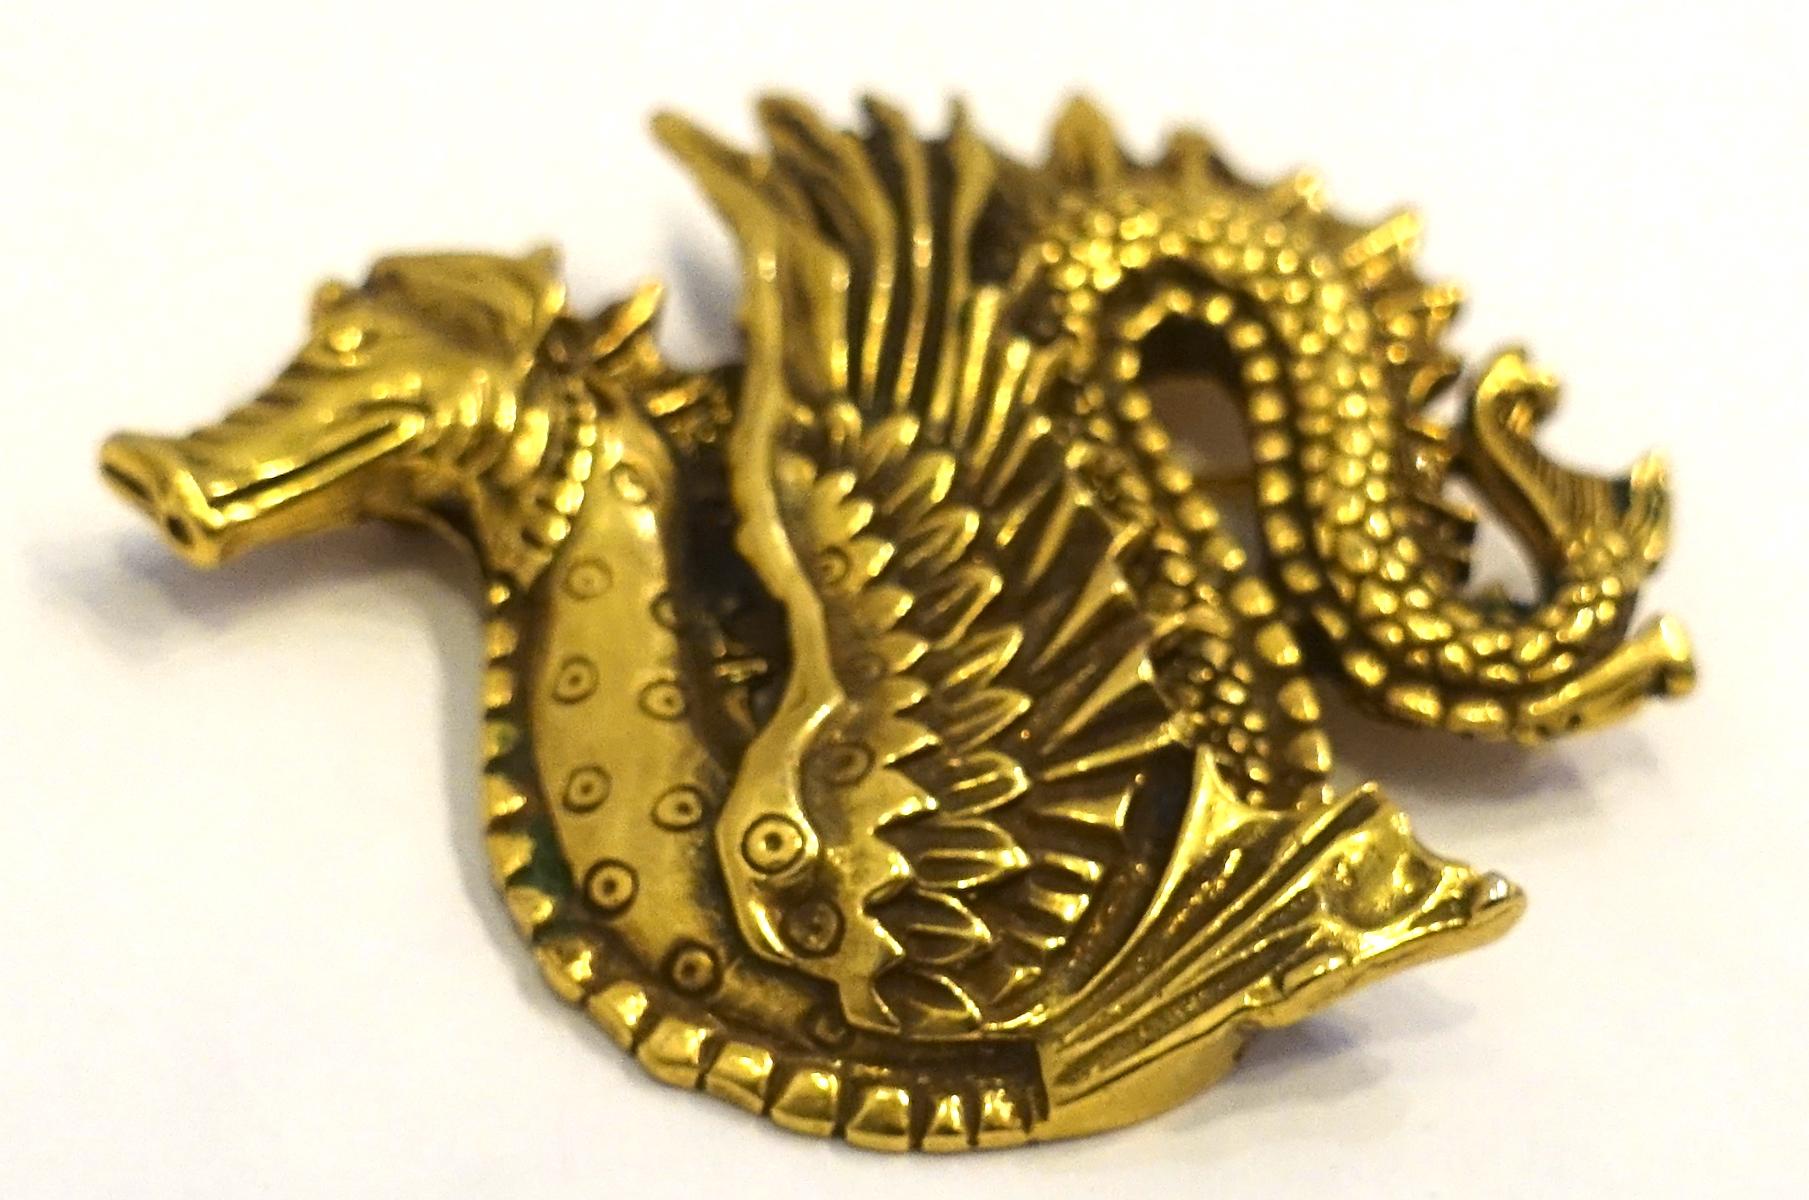 This vintage brooch is from the Museum of Modern Art and depicts a heavily carved dragon in a gold tone setting.  In excellent condition, this brooch measures 2-1/2” x 2” and is signed “MMA”.